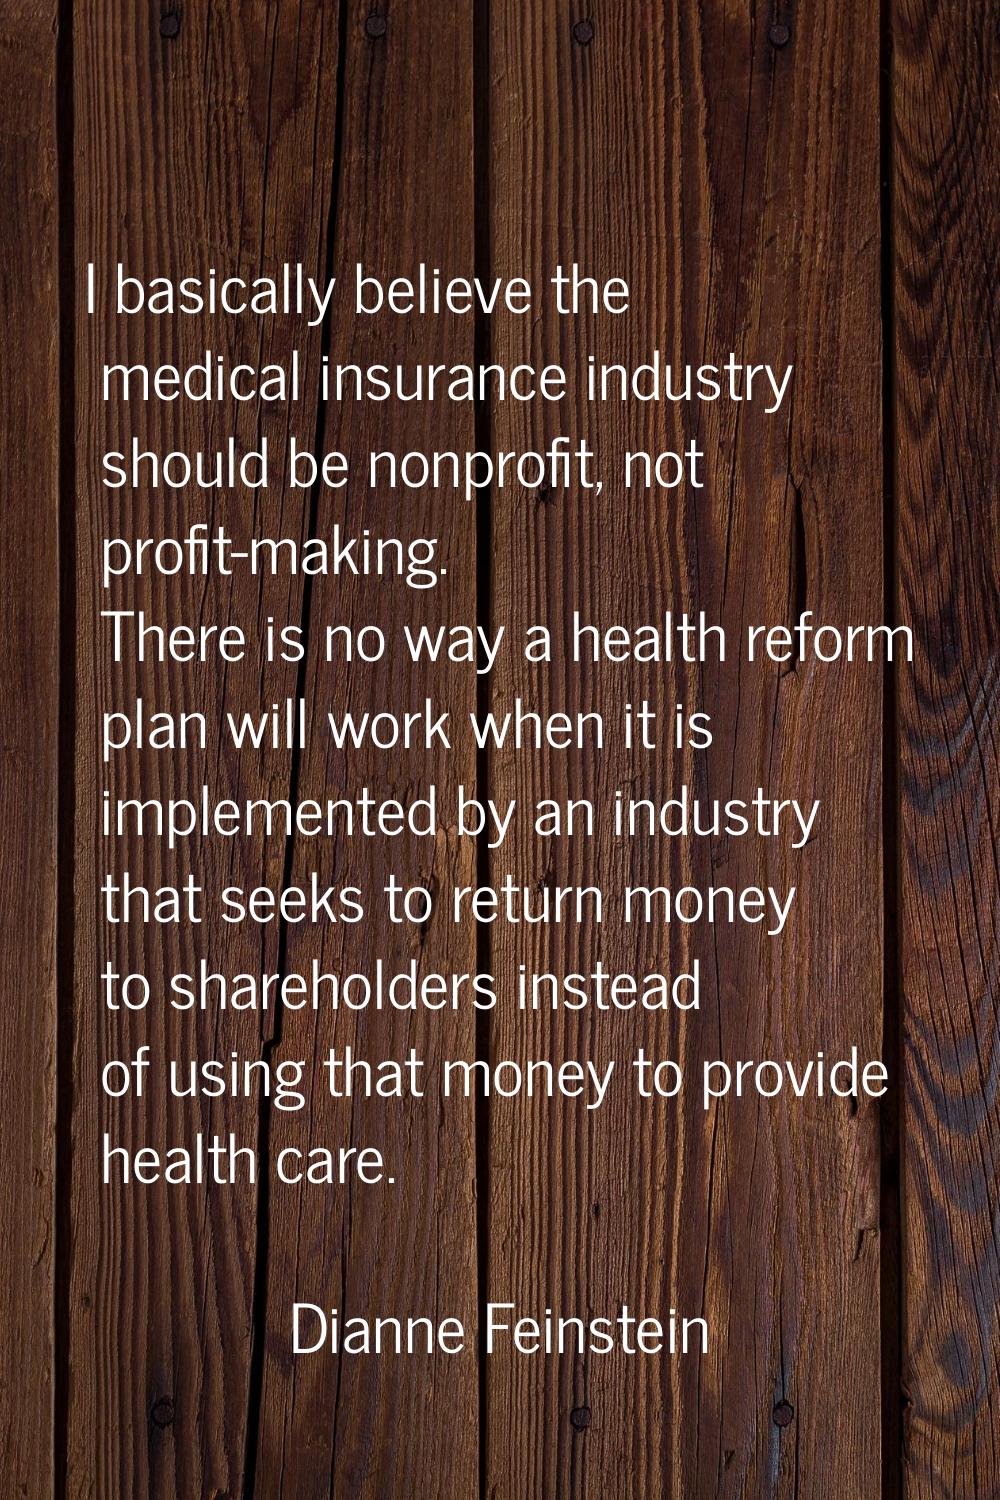 I basically believe the medical insurance industry should be nonprofit, not profit-making. There is